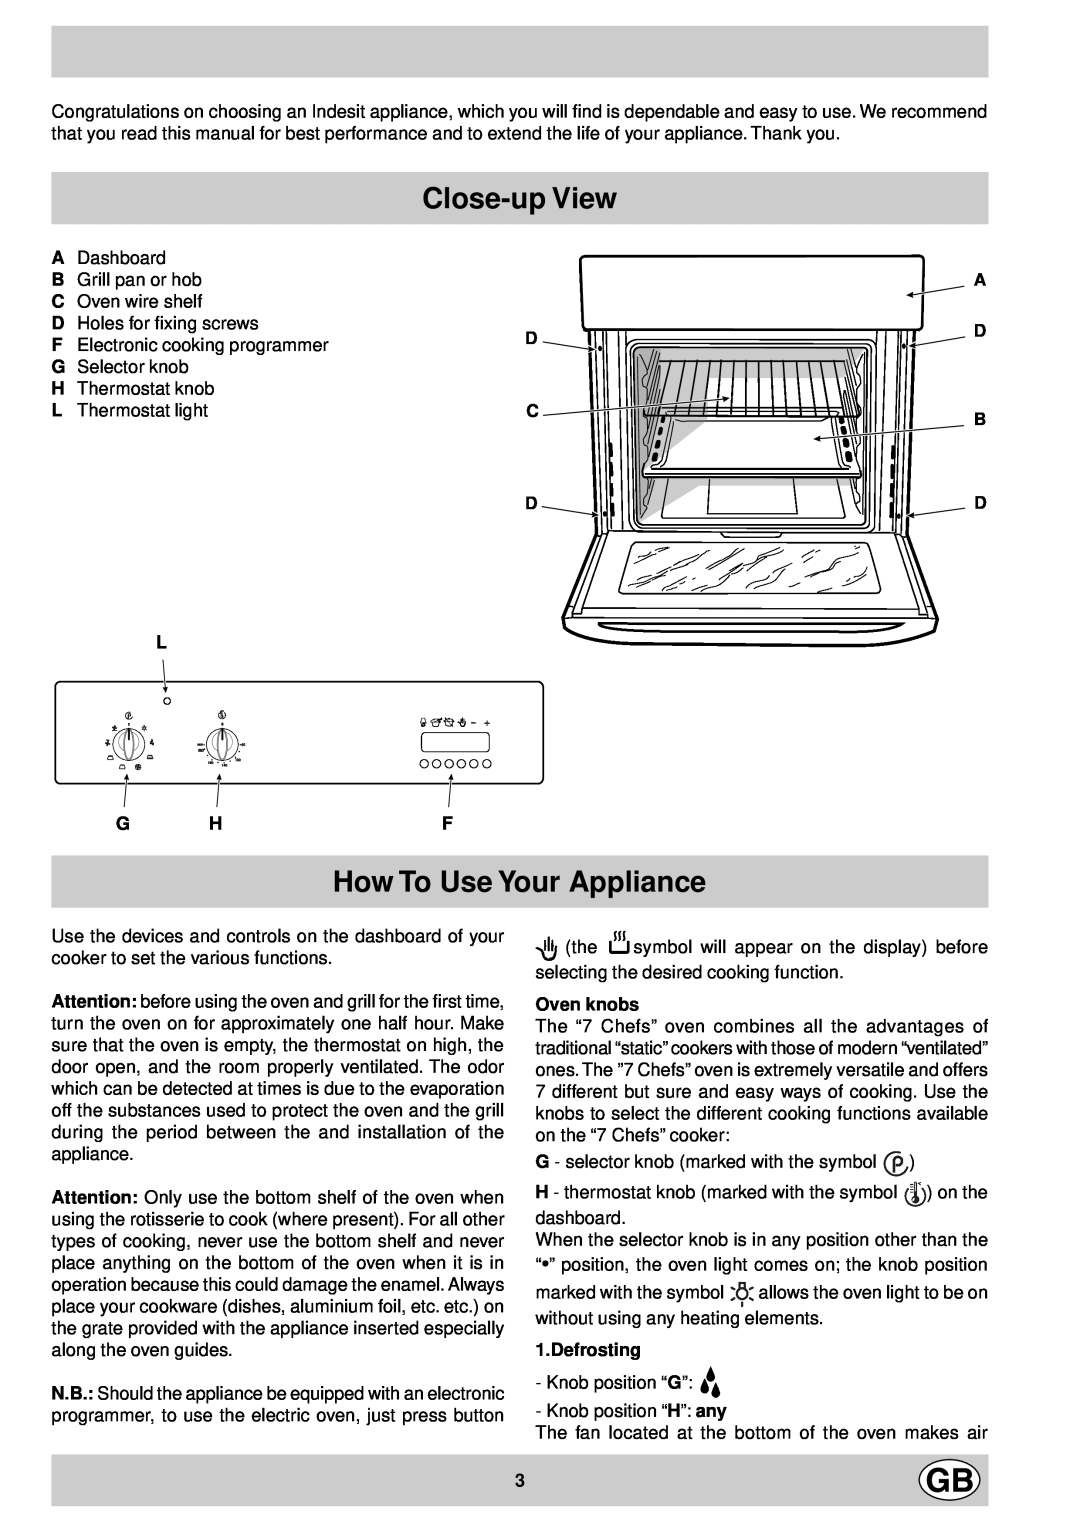 Indesit FM 37K IX DK manual Close-upView, How To Use Your Appliance, A Dd Cb Dd, Oven knobs, Defrosting 